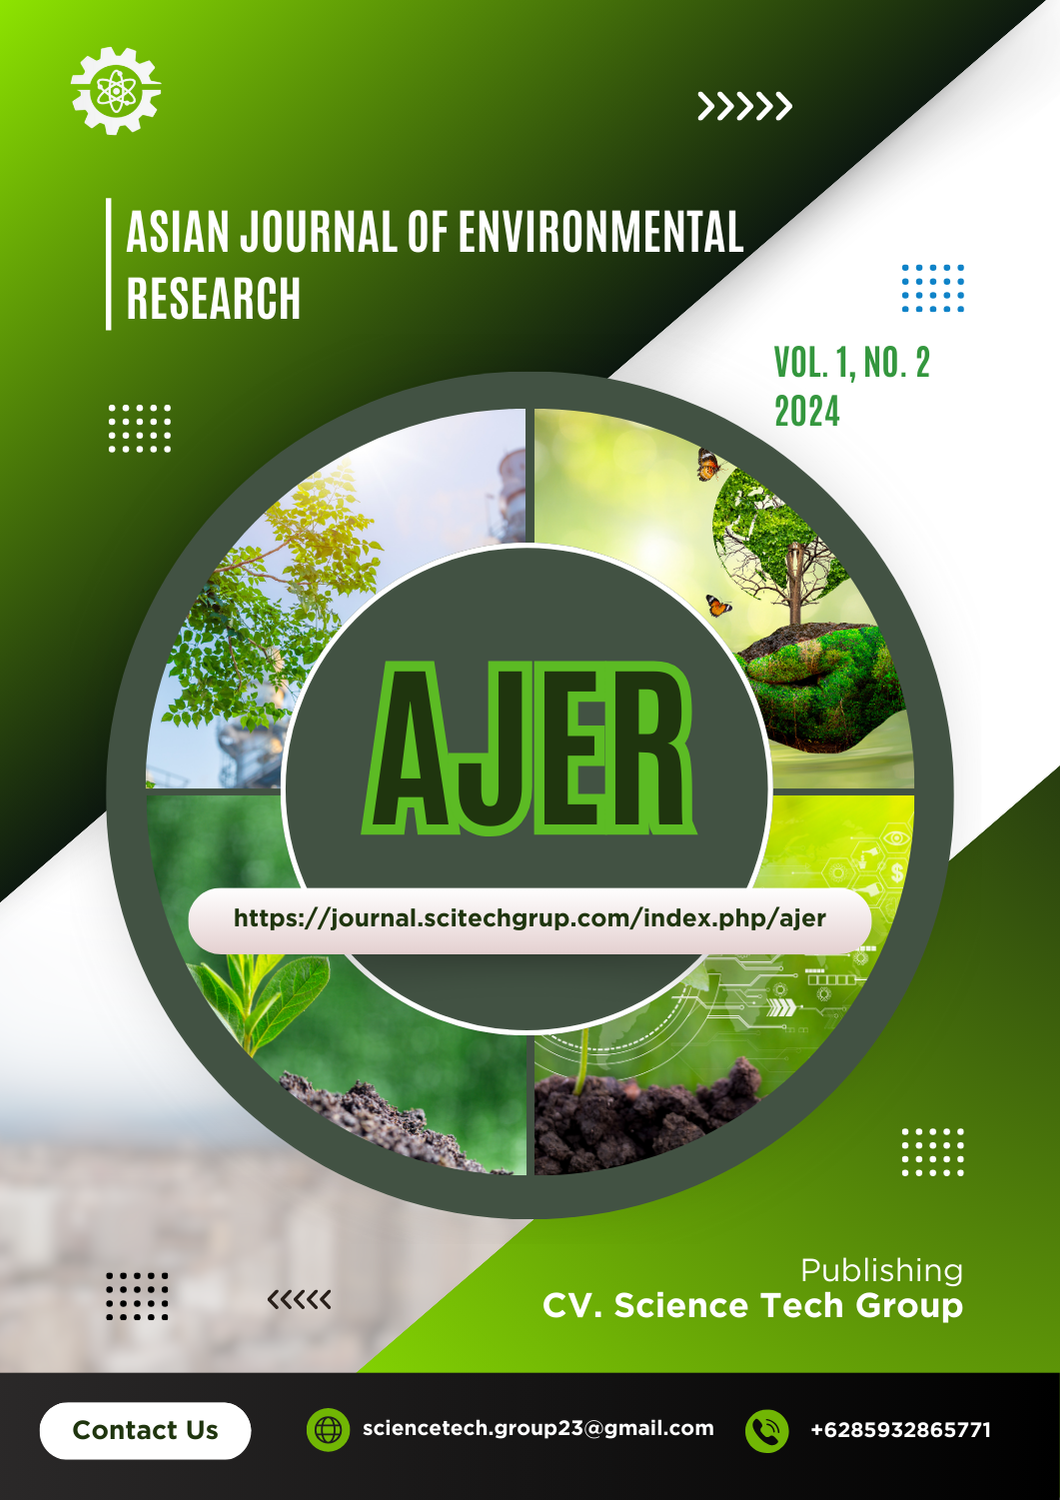 					View Vol. 1 No. 2 (2024): Asian Journal of Environmental Research
				